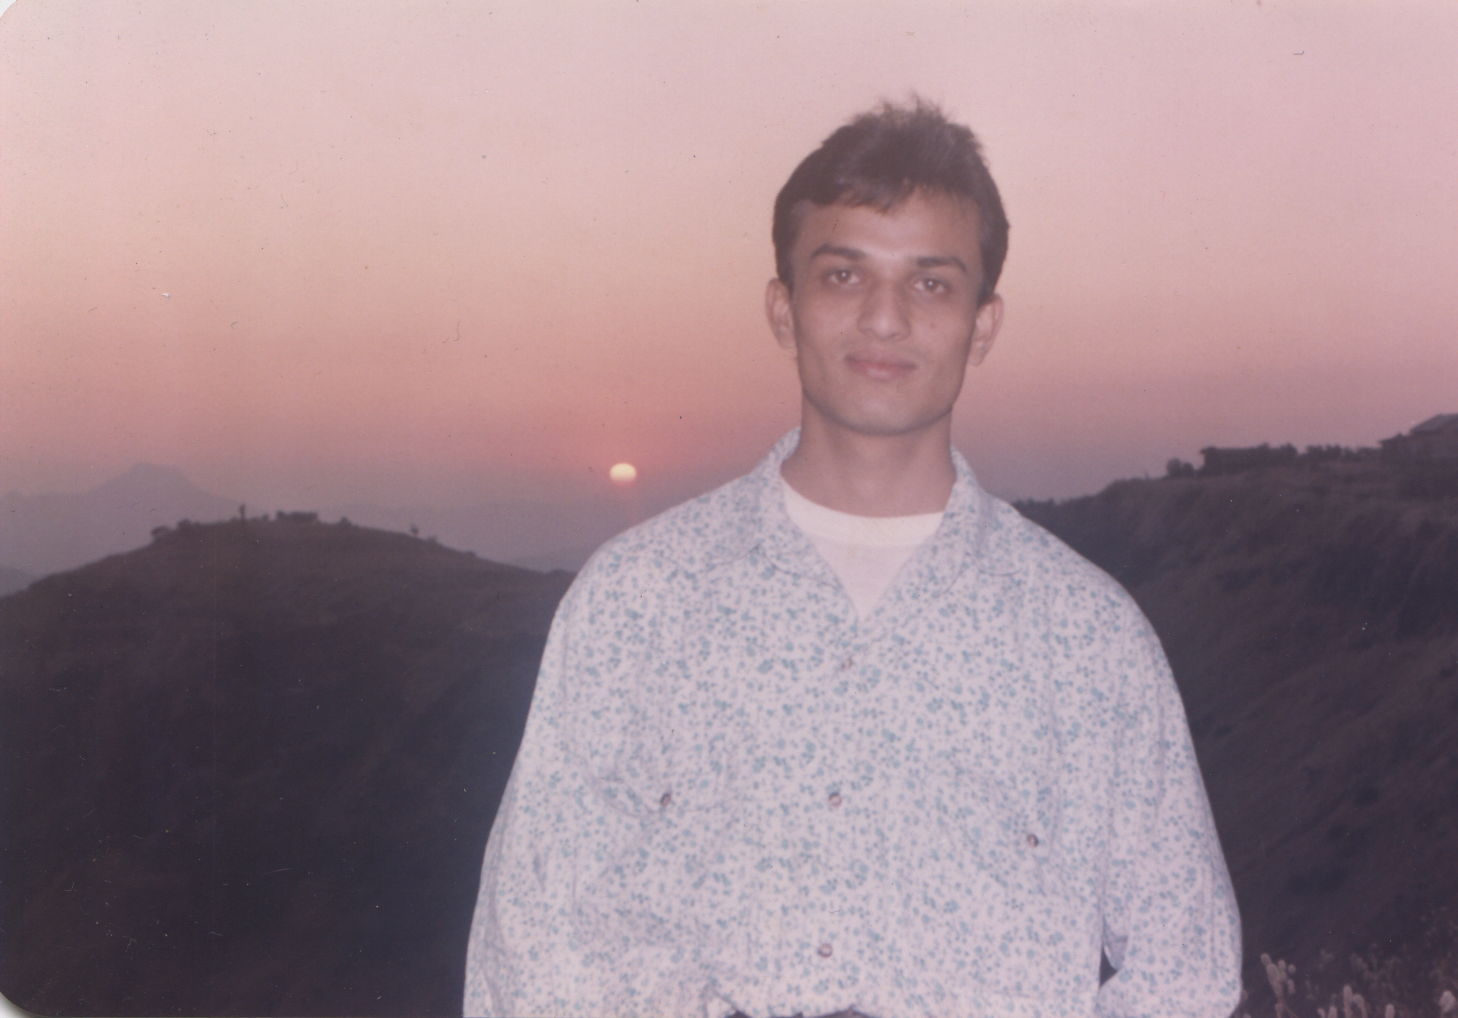 That's me at Sinhagad fort near Pune (India)